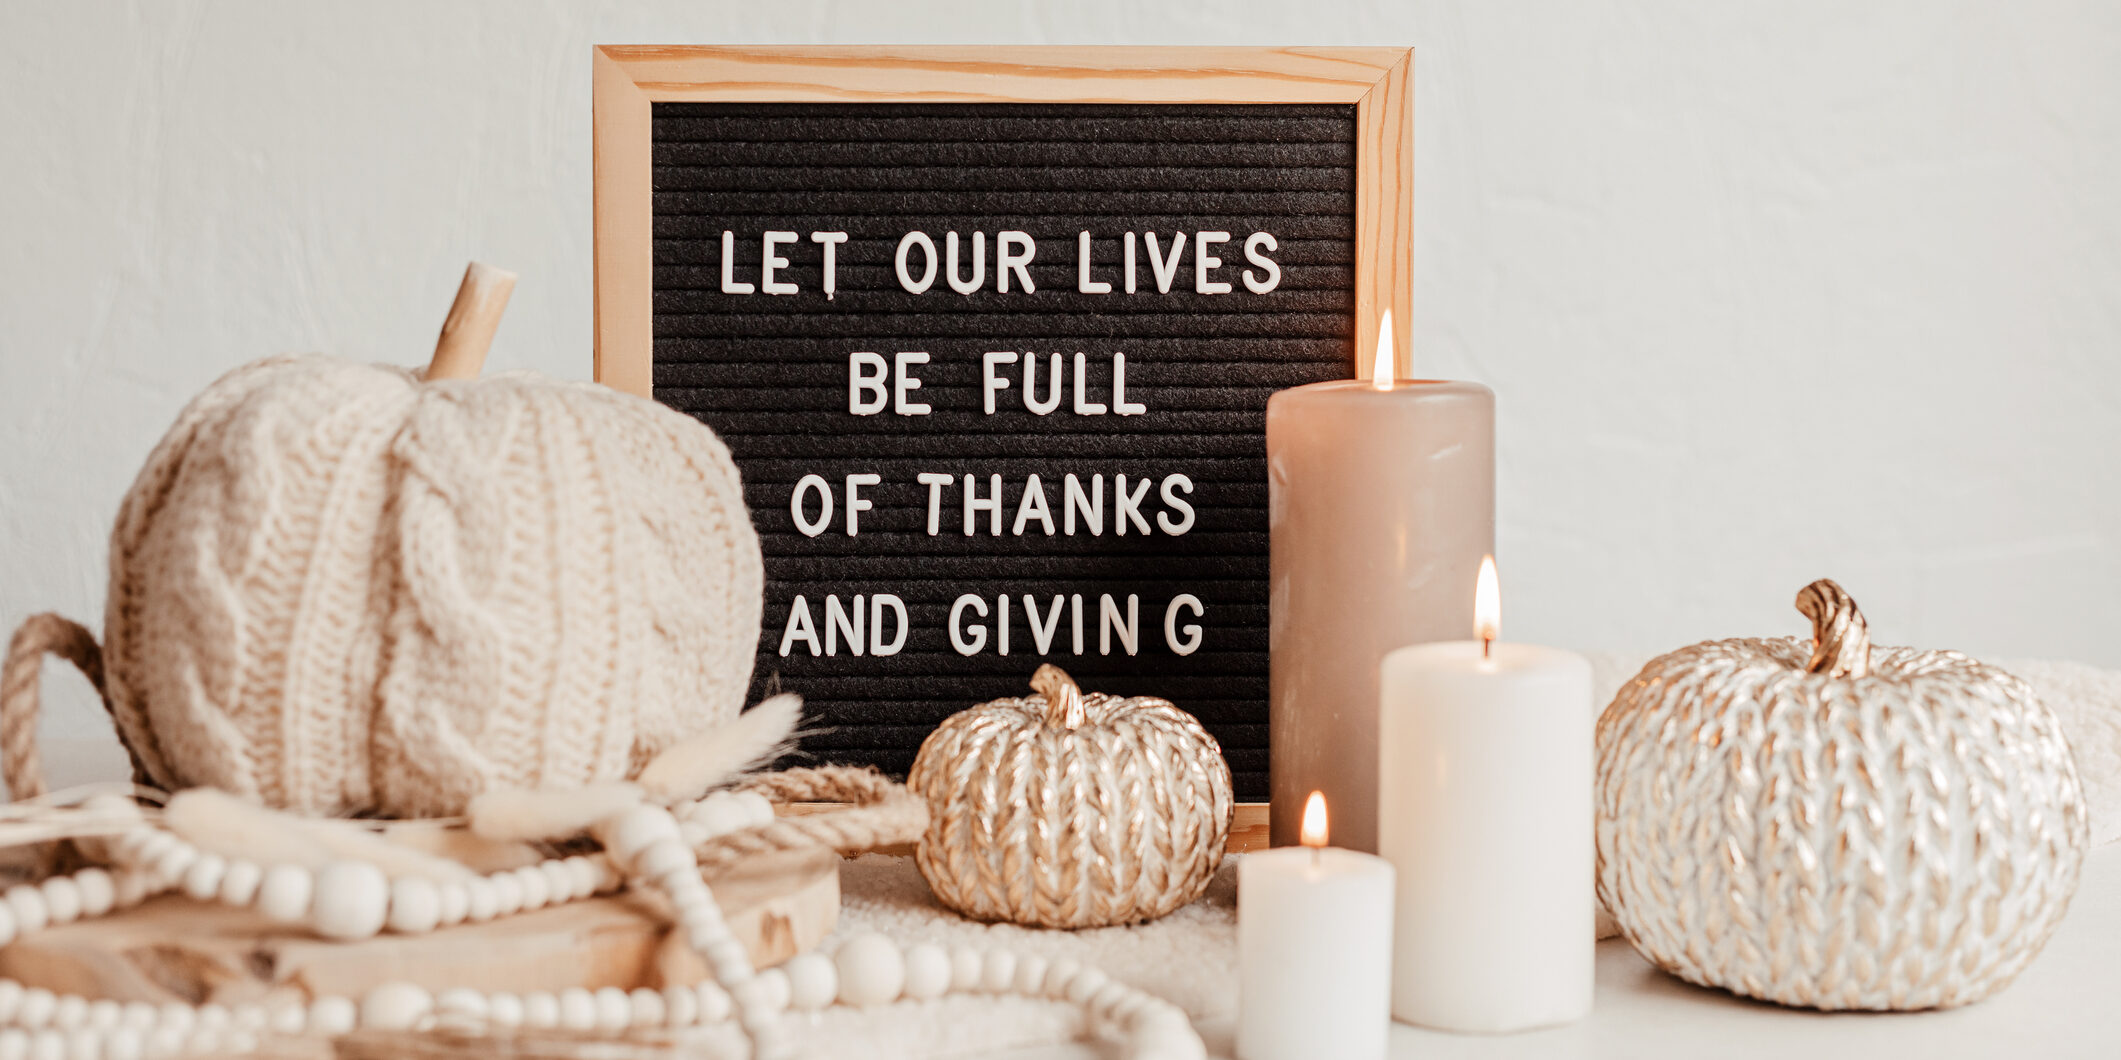 Candles and white, crochet pumpkins arranged around a letter board sign that reads: Let our lives be full of thanks and giving